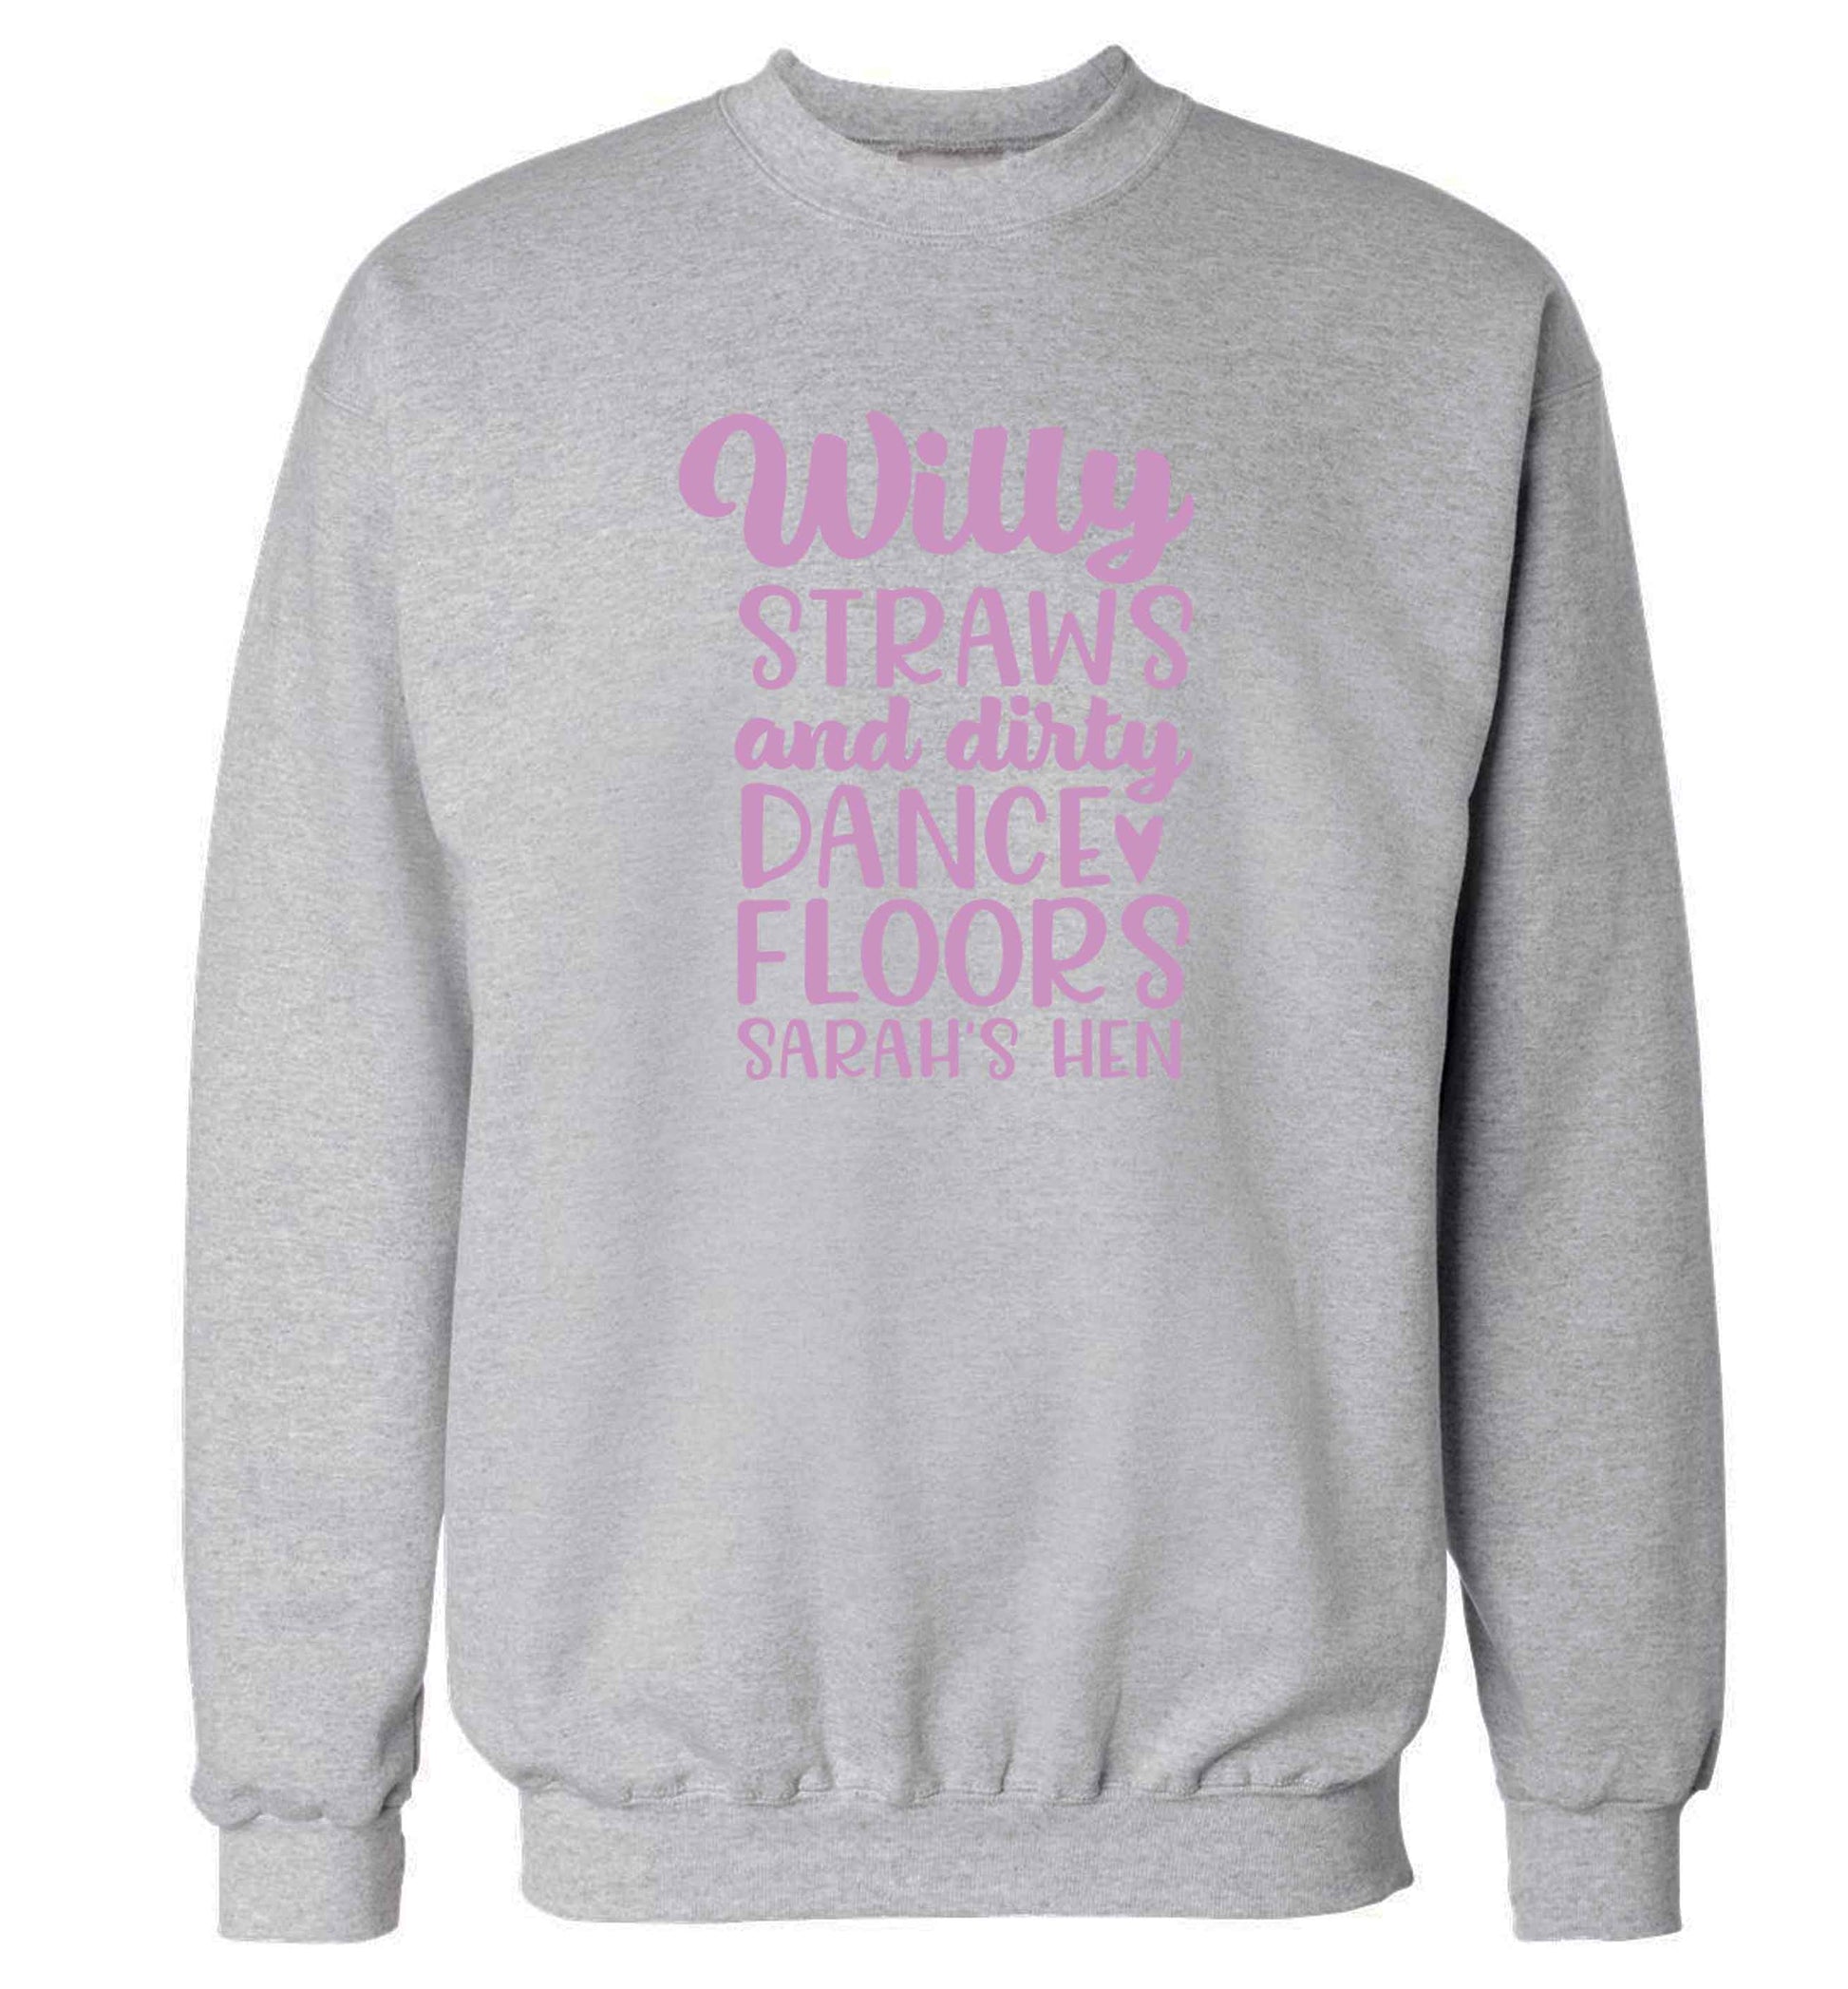 Willy straws and dirty dance floors adult's unisex grey sweater 2XL